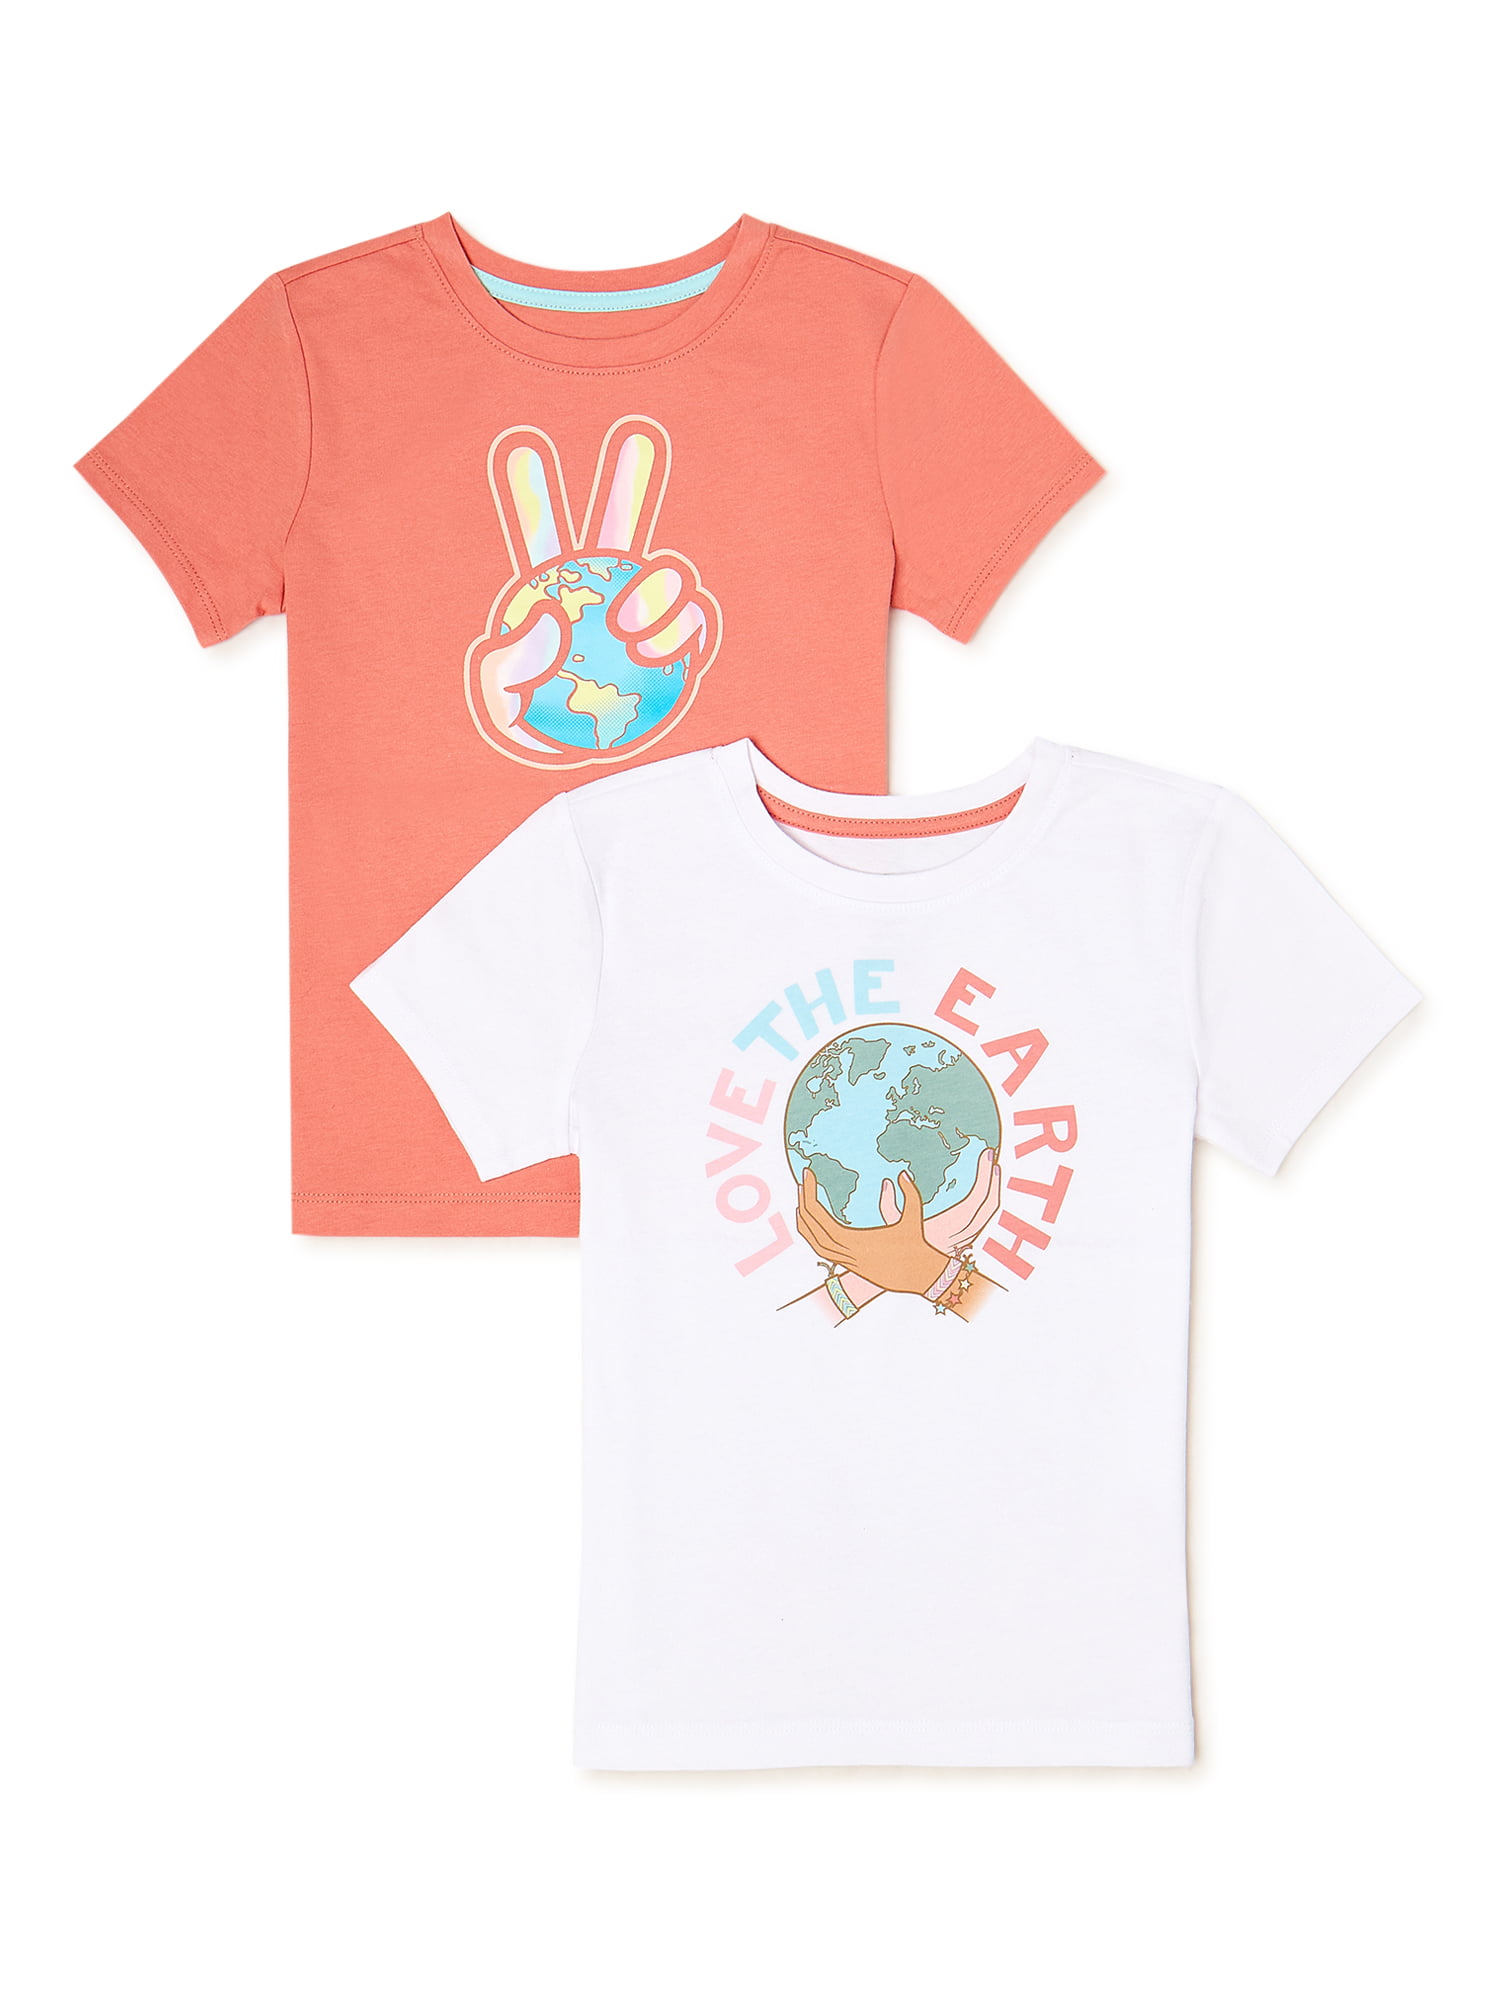 Girls Earth Day Graphic T-Shirts, 2-Pack, Sizes 4-18 - Walmart.com